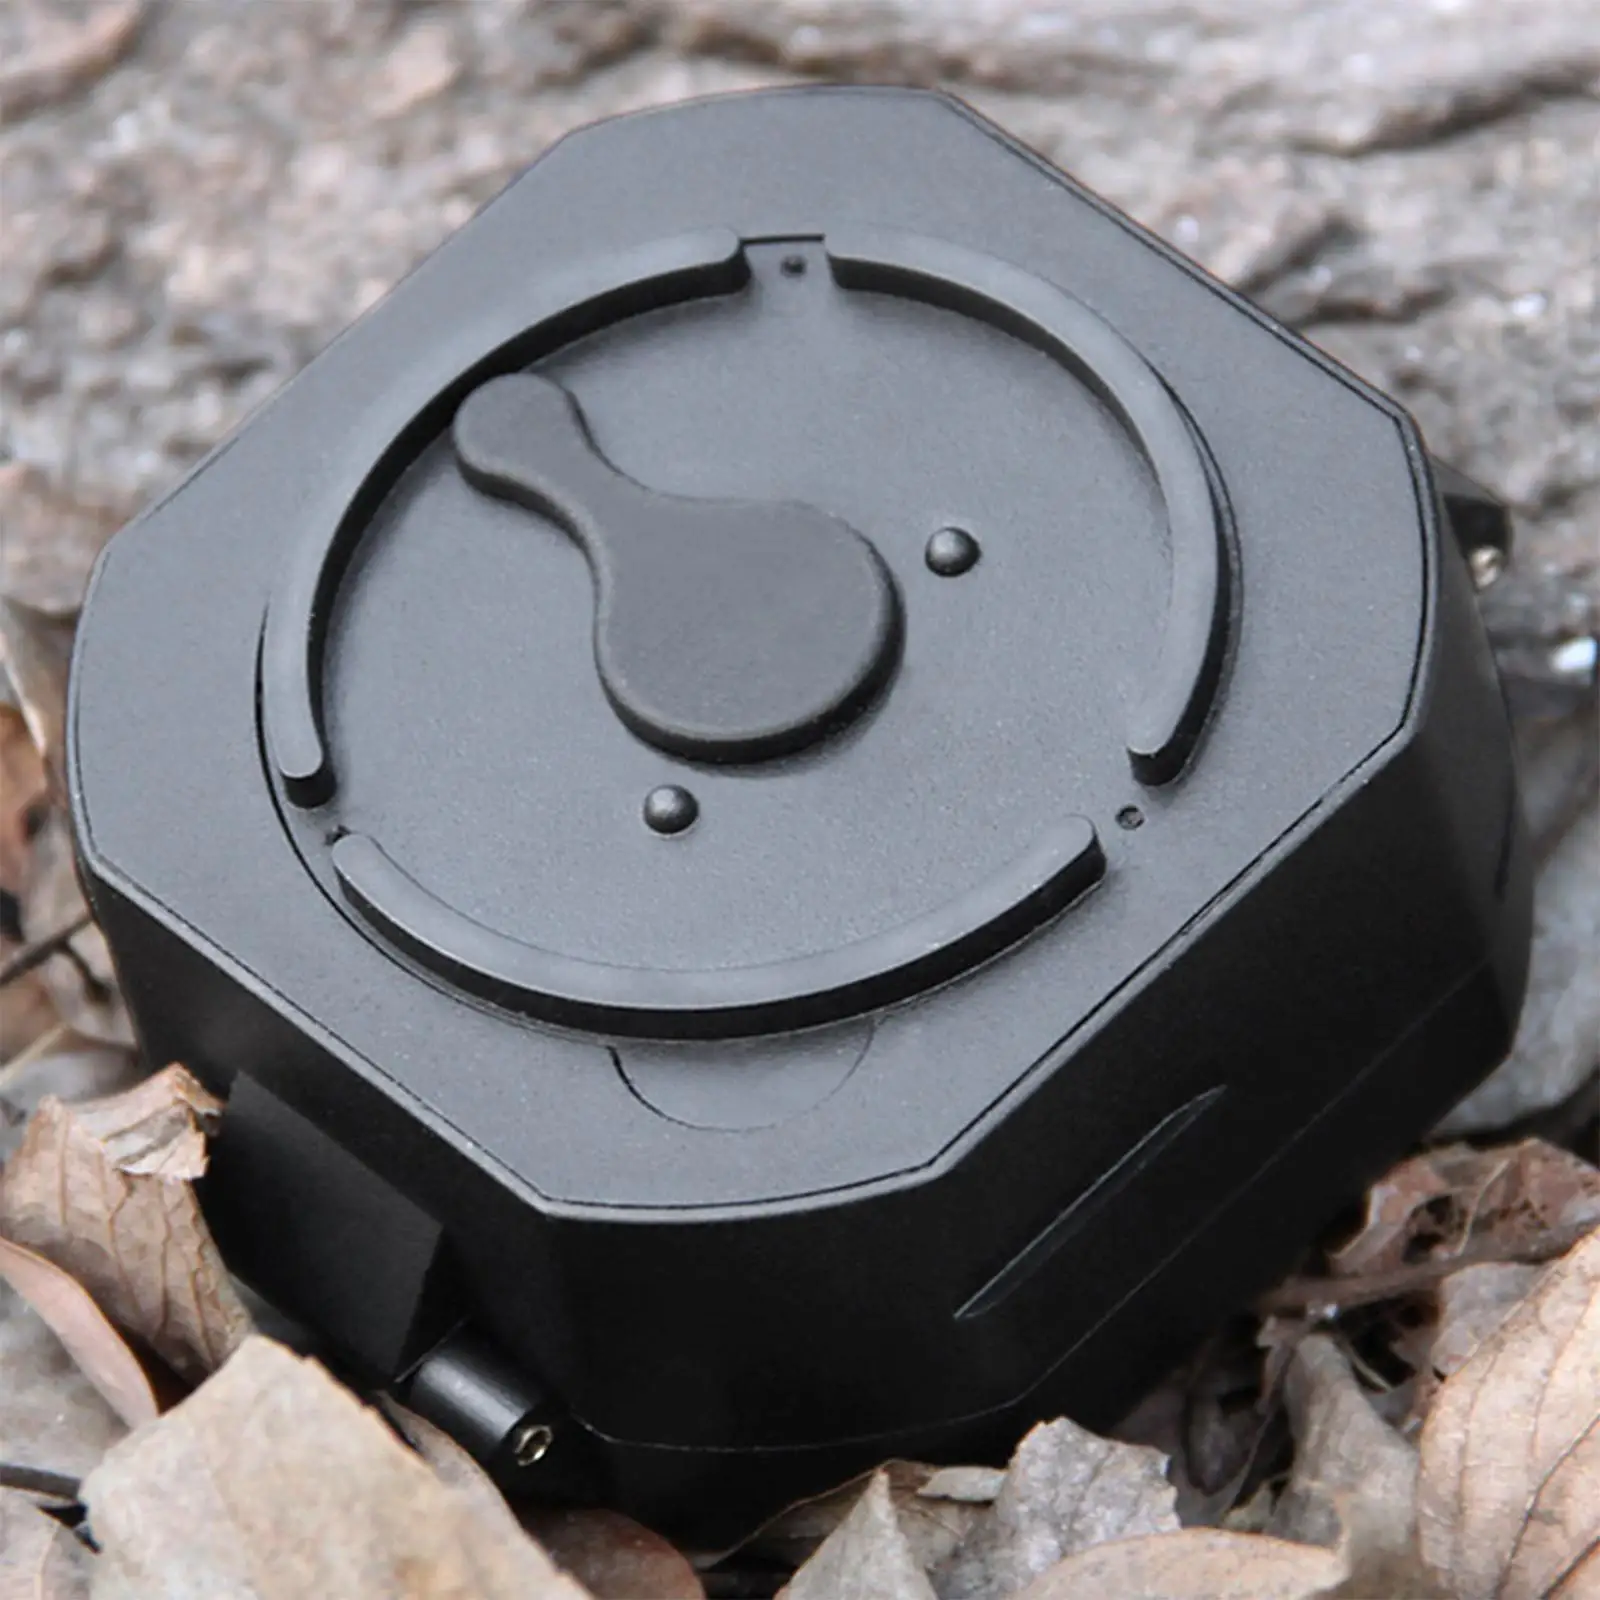 Portable Geology Compass Sighting for Surveyors Camping Supplies